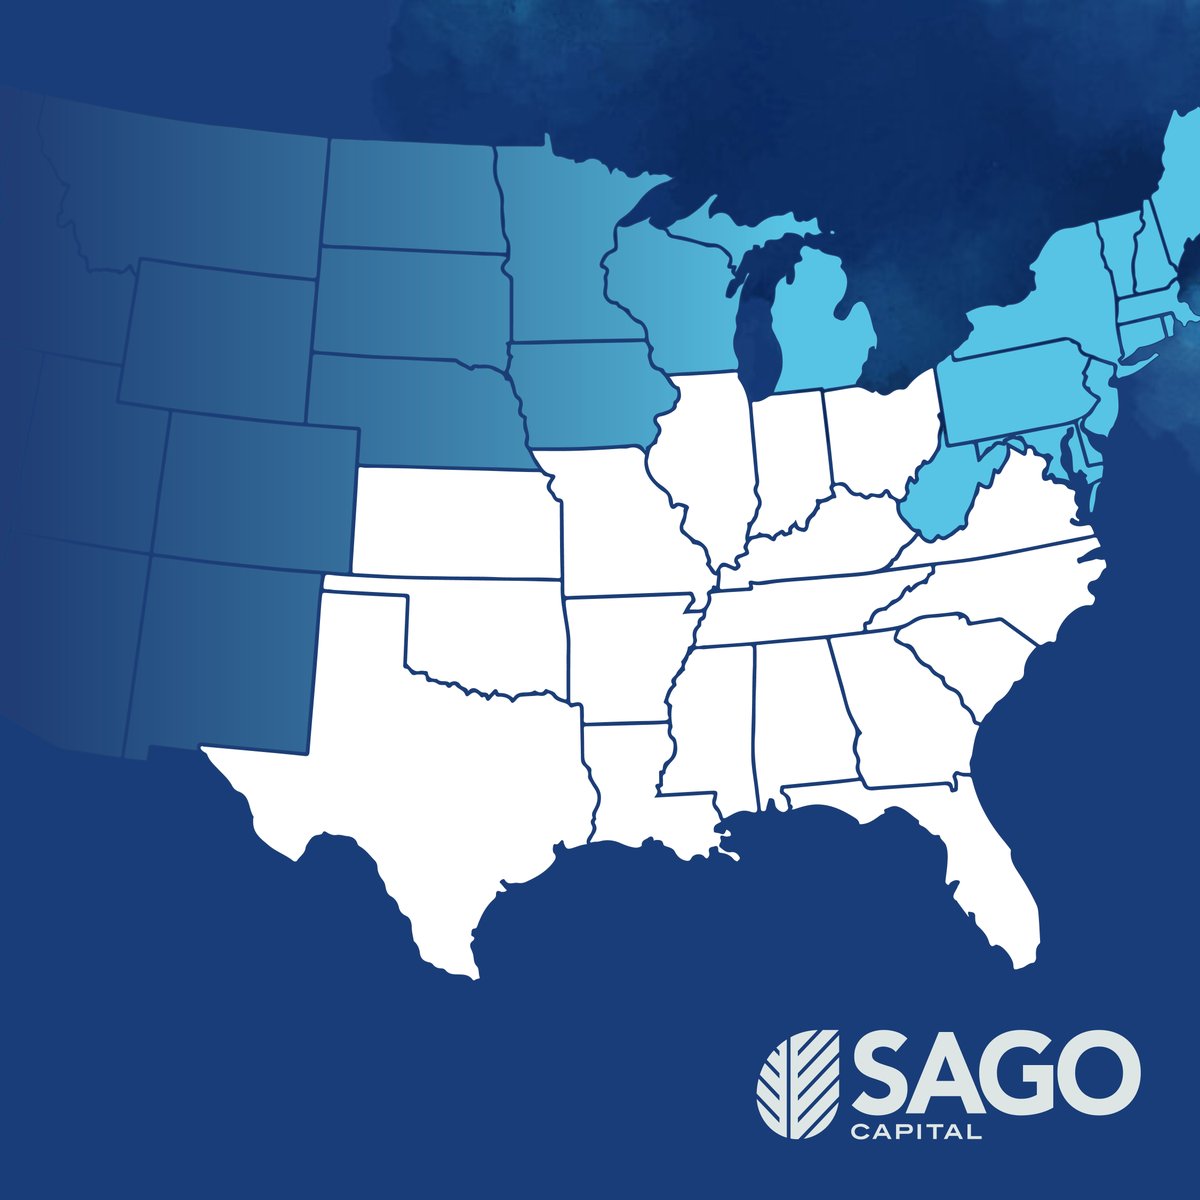 Sago is actively pursuing deals in various Southeast and lower Midwest markets. If you have a deal in these markets that might interest us, email us at hello@sagocap.com with details. #CRE #CREinvesting #SagoCapital #Sago #SEC #ACC